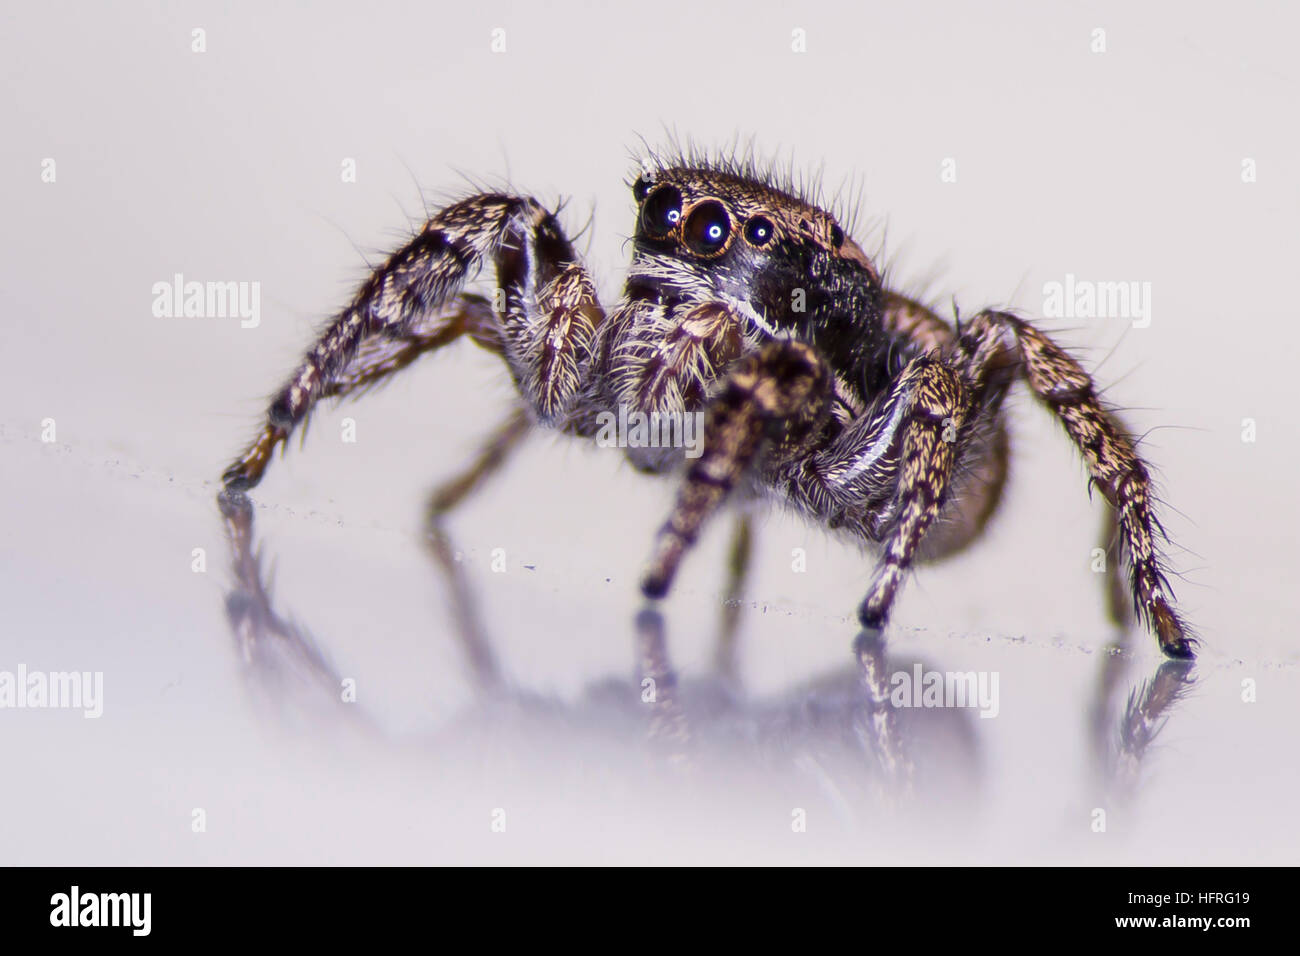 Close-up of a female Habronattus oregonensis (a jumping spider). Photographed on a white background. Stock Photo